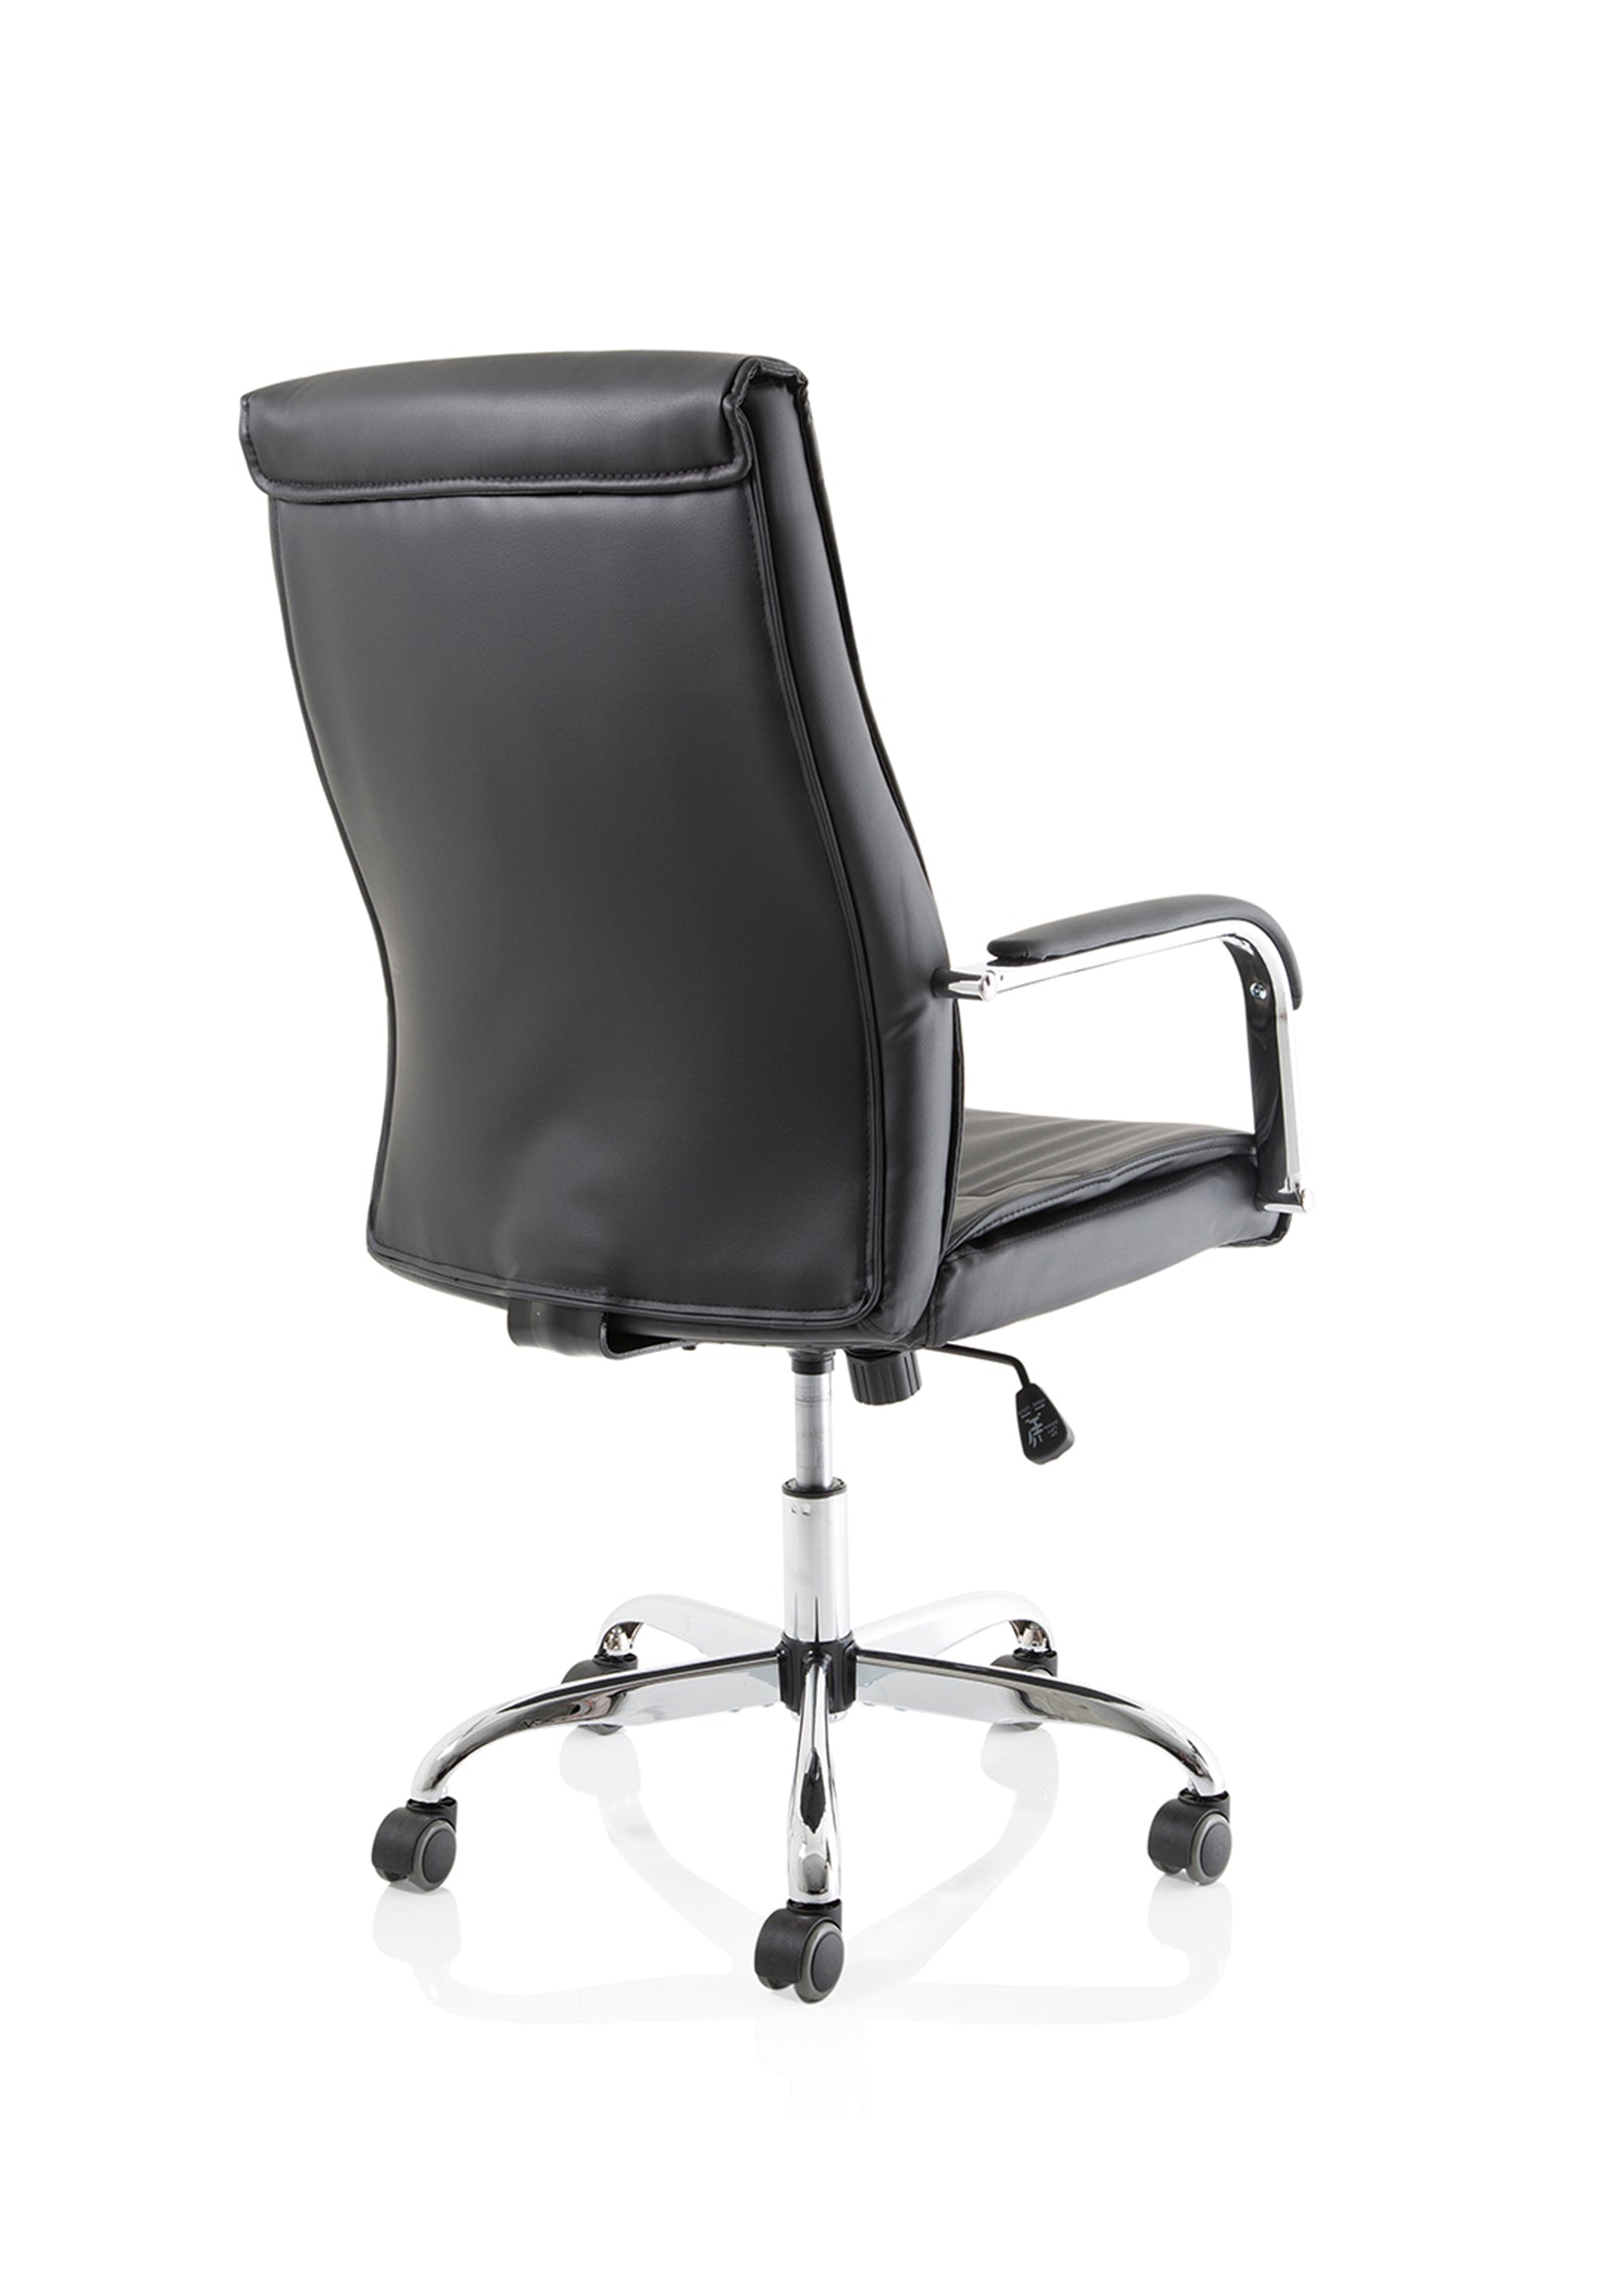 Carter High Back Black Leather Executive Office Chair with Arms